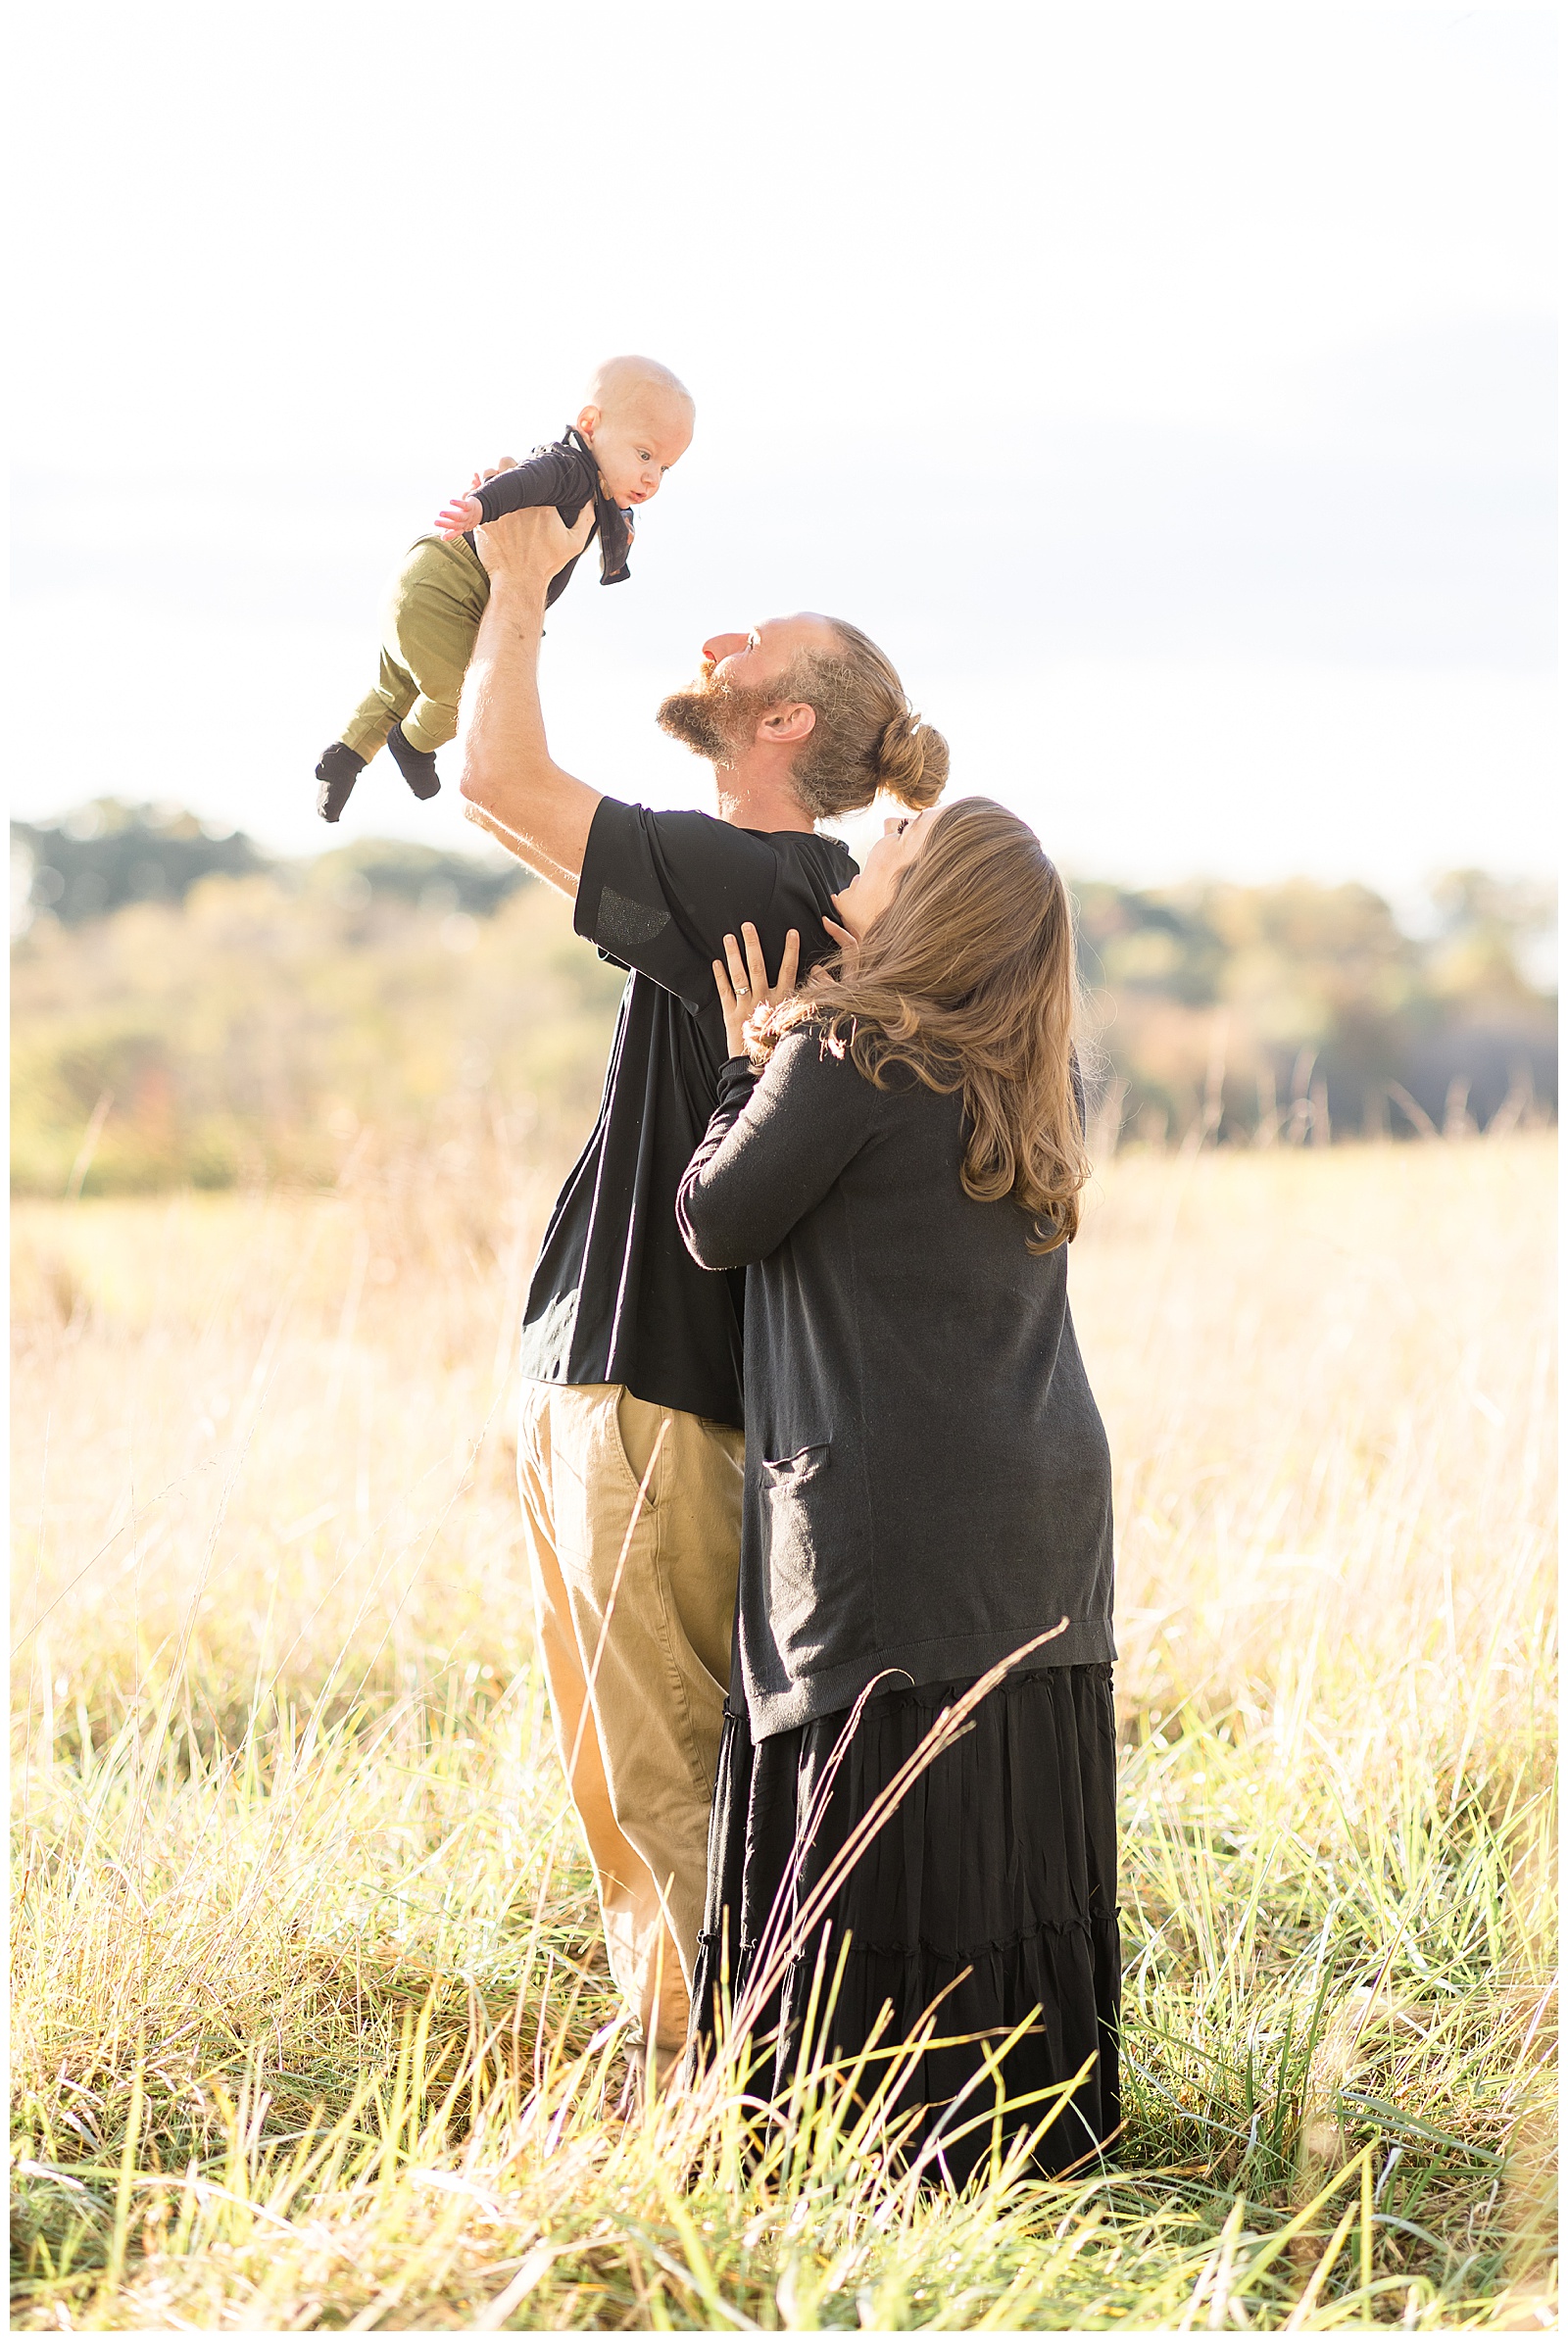 Dad holds baby boy up in the air as mom comes from behind his shoulder and they both look up at their son during their family photography session in Richmond, VA.